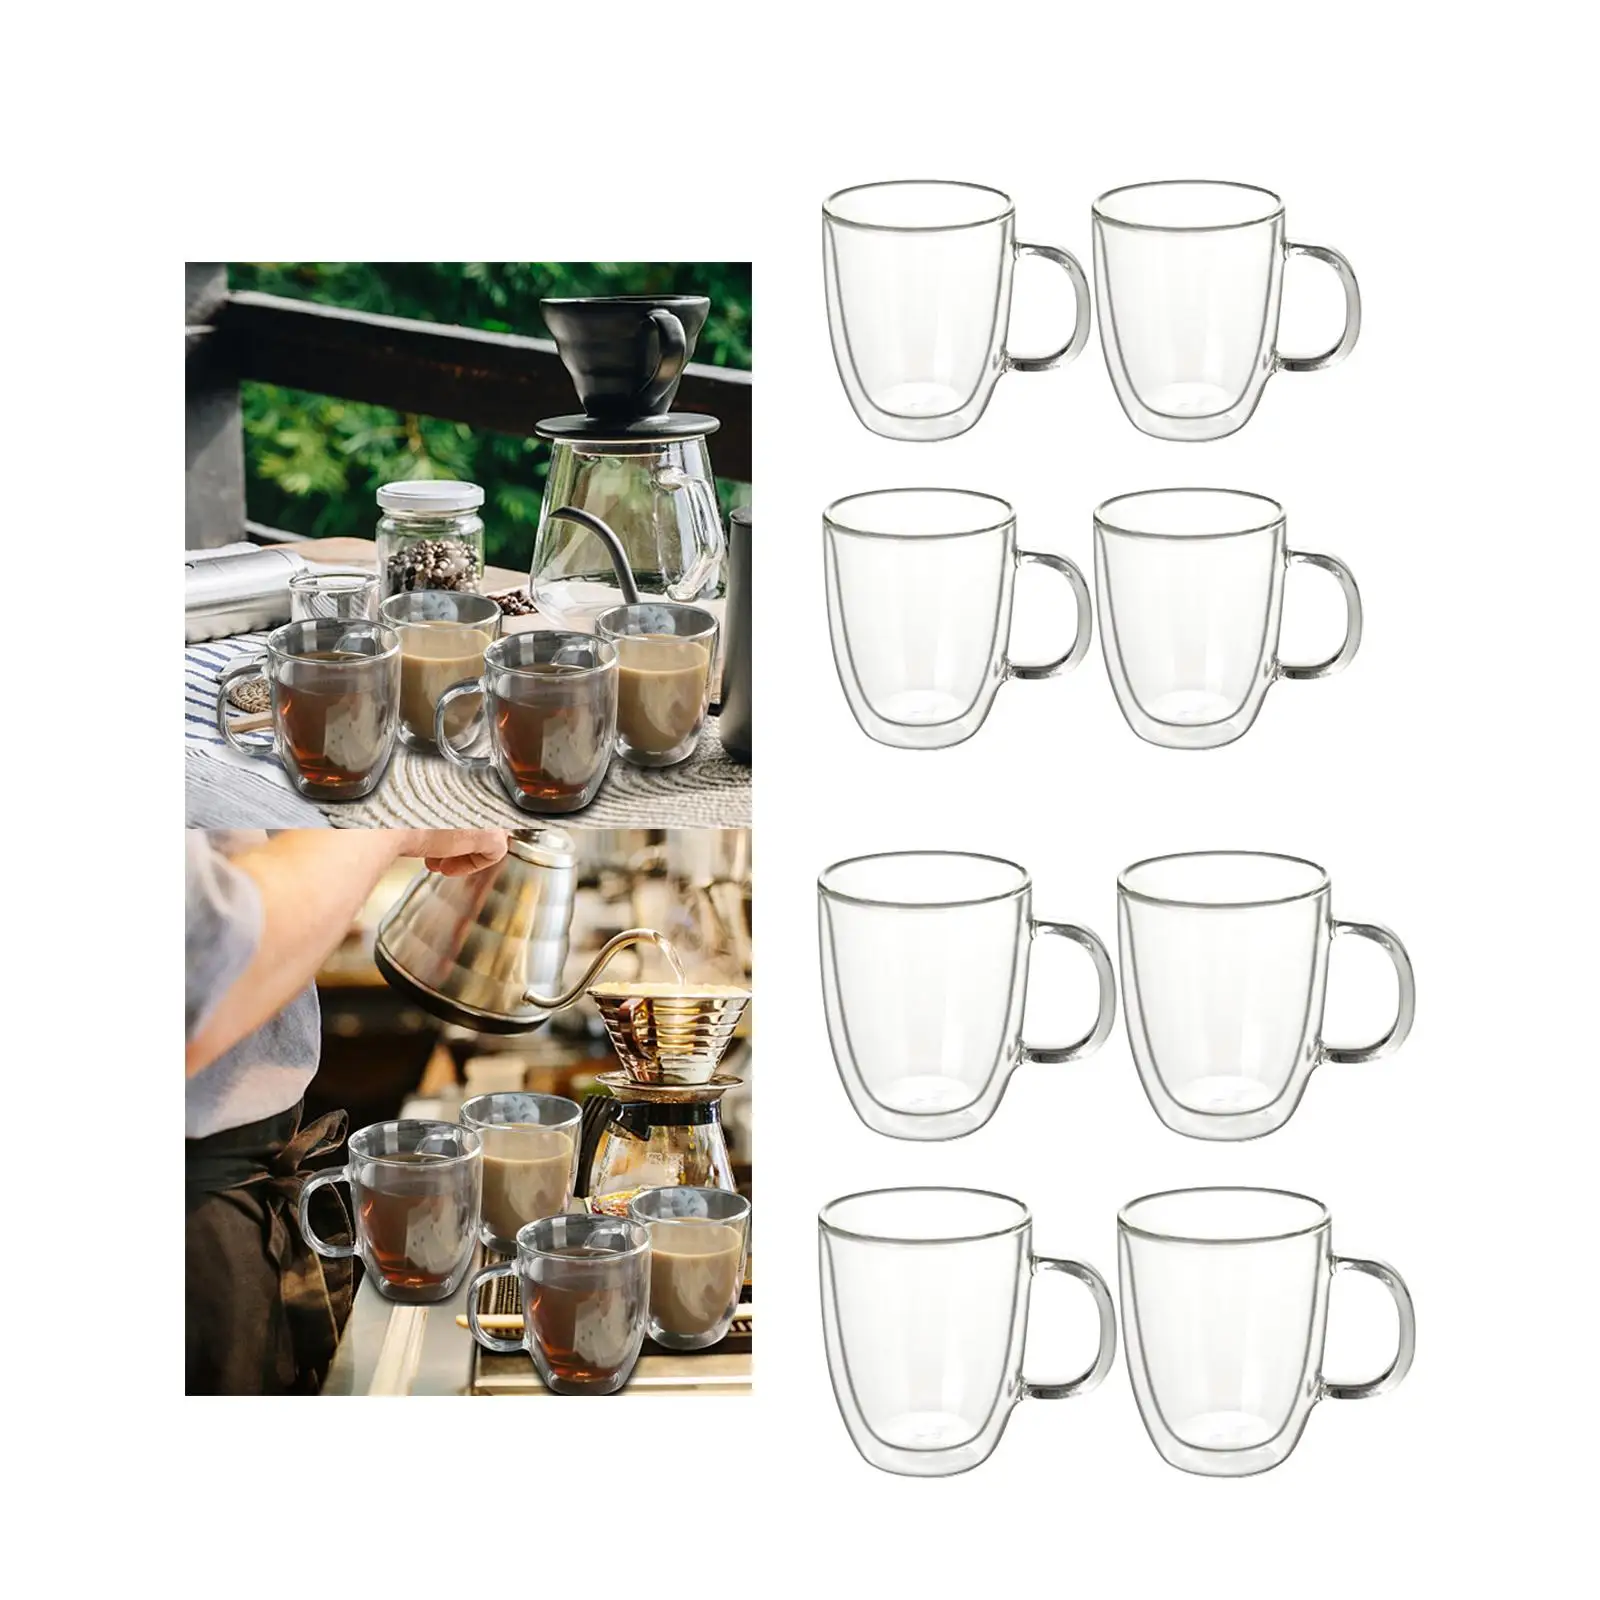 4 Piece Double Wall Glass Cup Drink Mugs Anti-Scalding Heat Resistant Hand Blown Insulated Coffee Mug for Tea Cappuccino Coffee